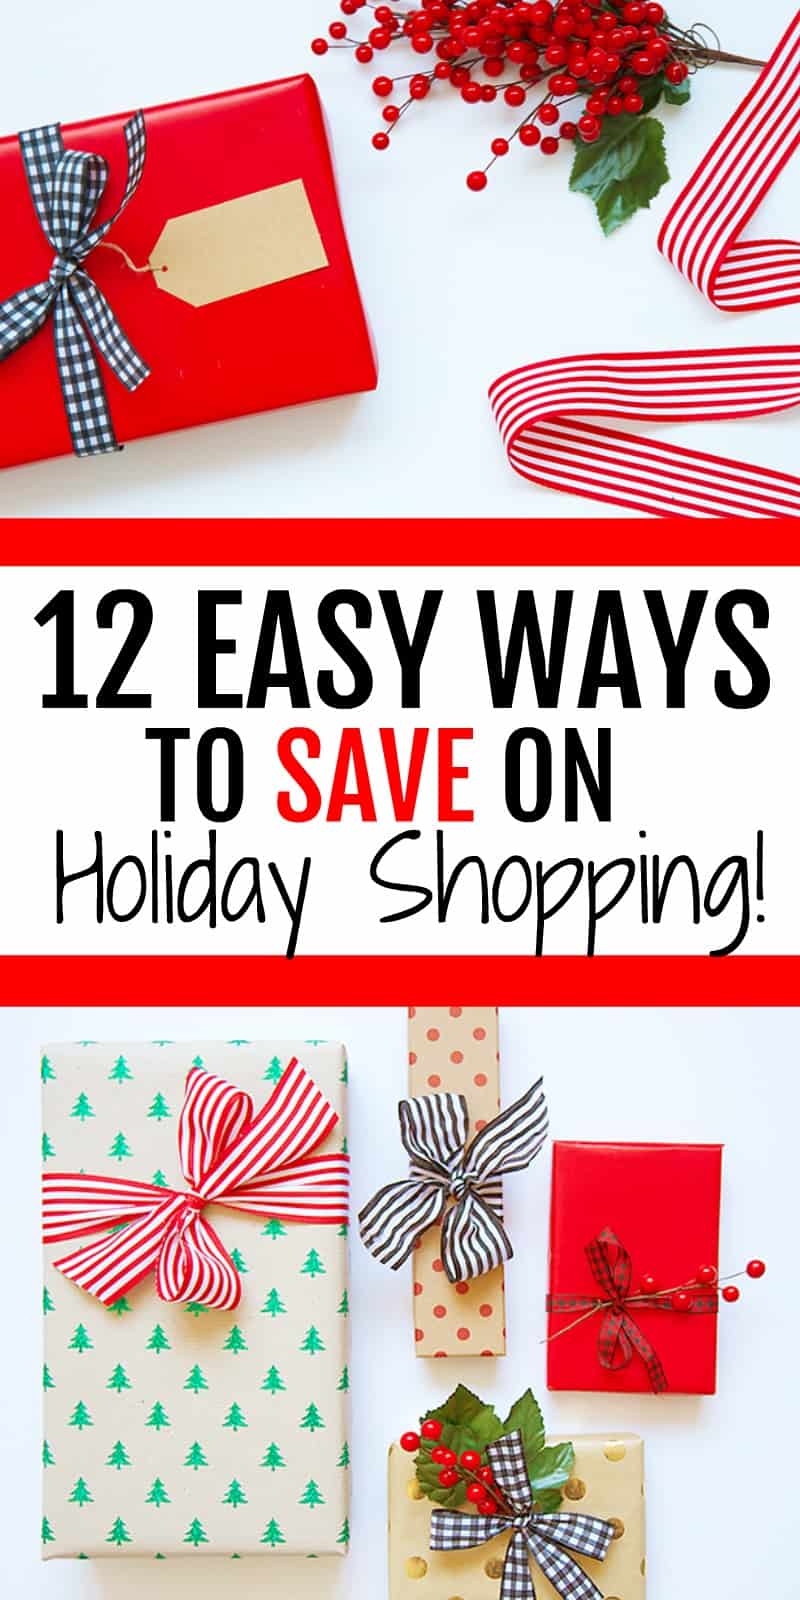 12 Easy Ways To Save On Holida!   y Shopping - save money on christmas gifts this year with these helpful tips that will take your holiday